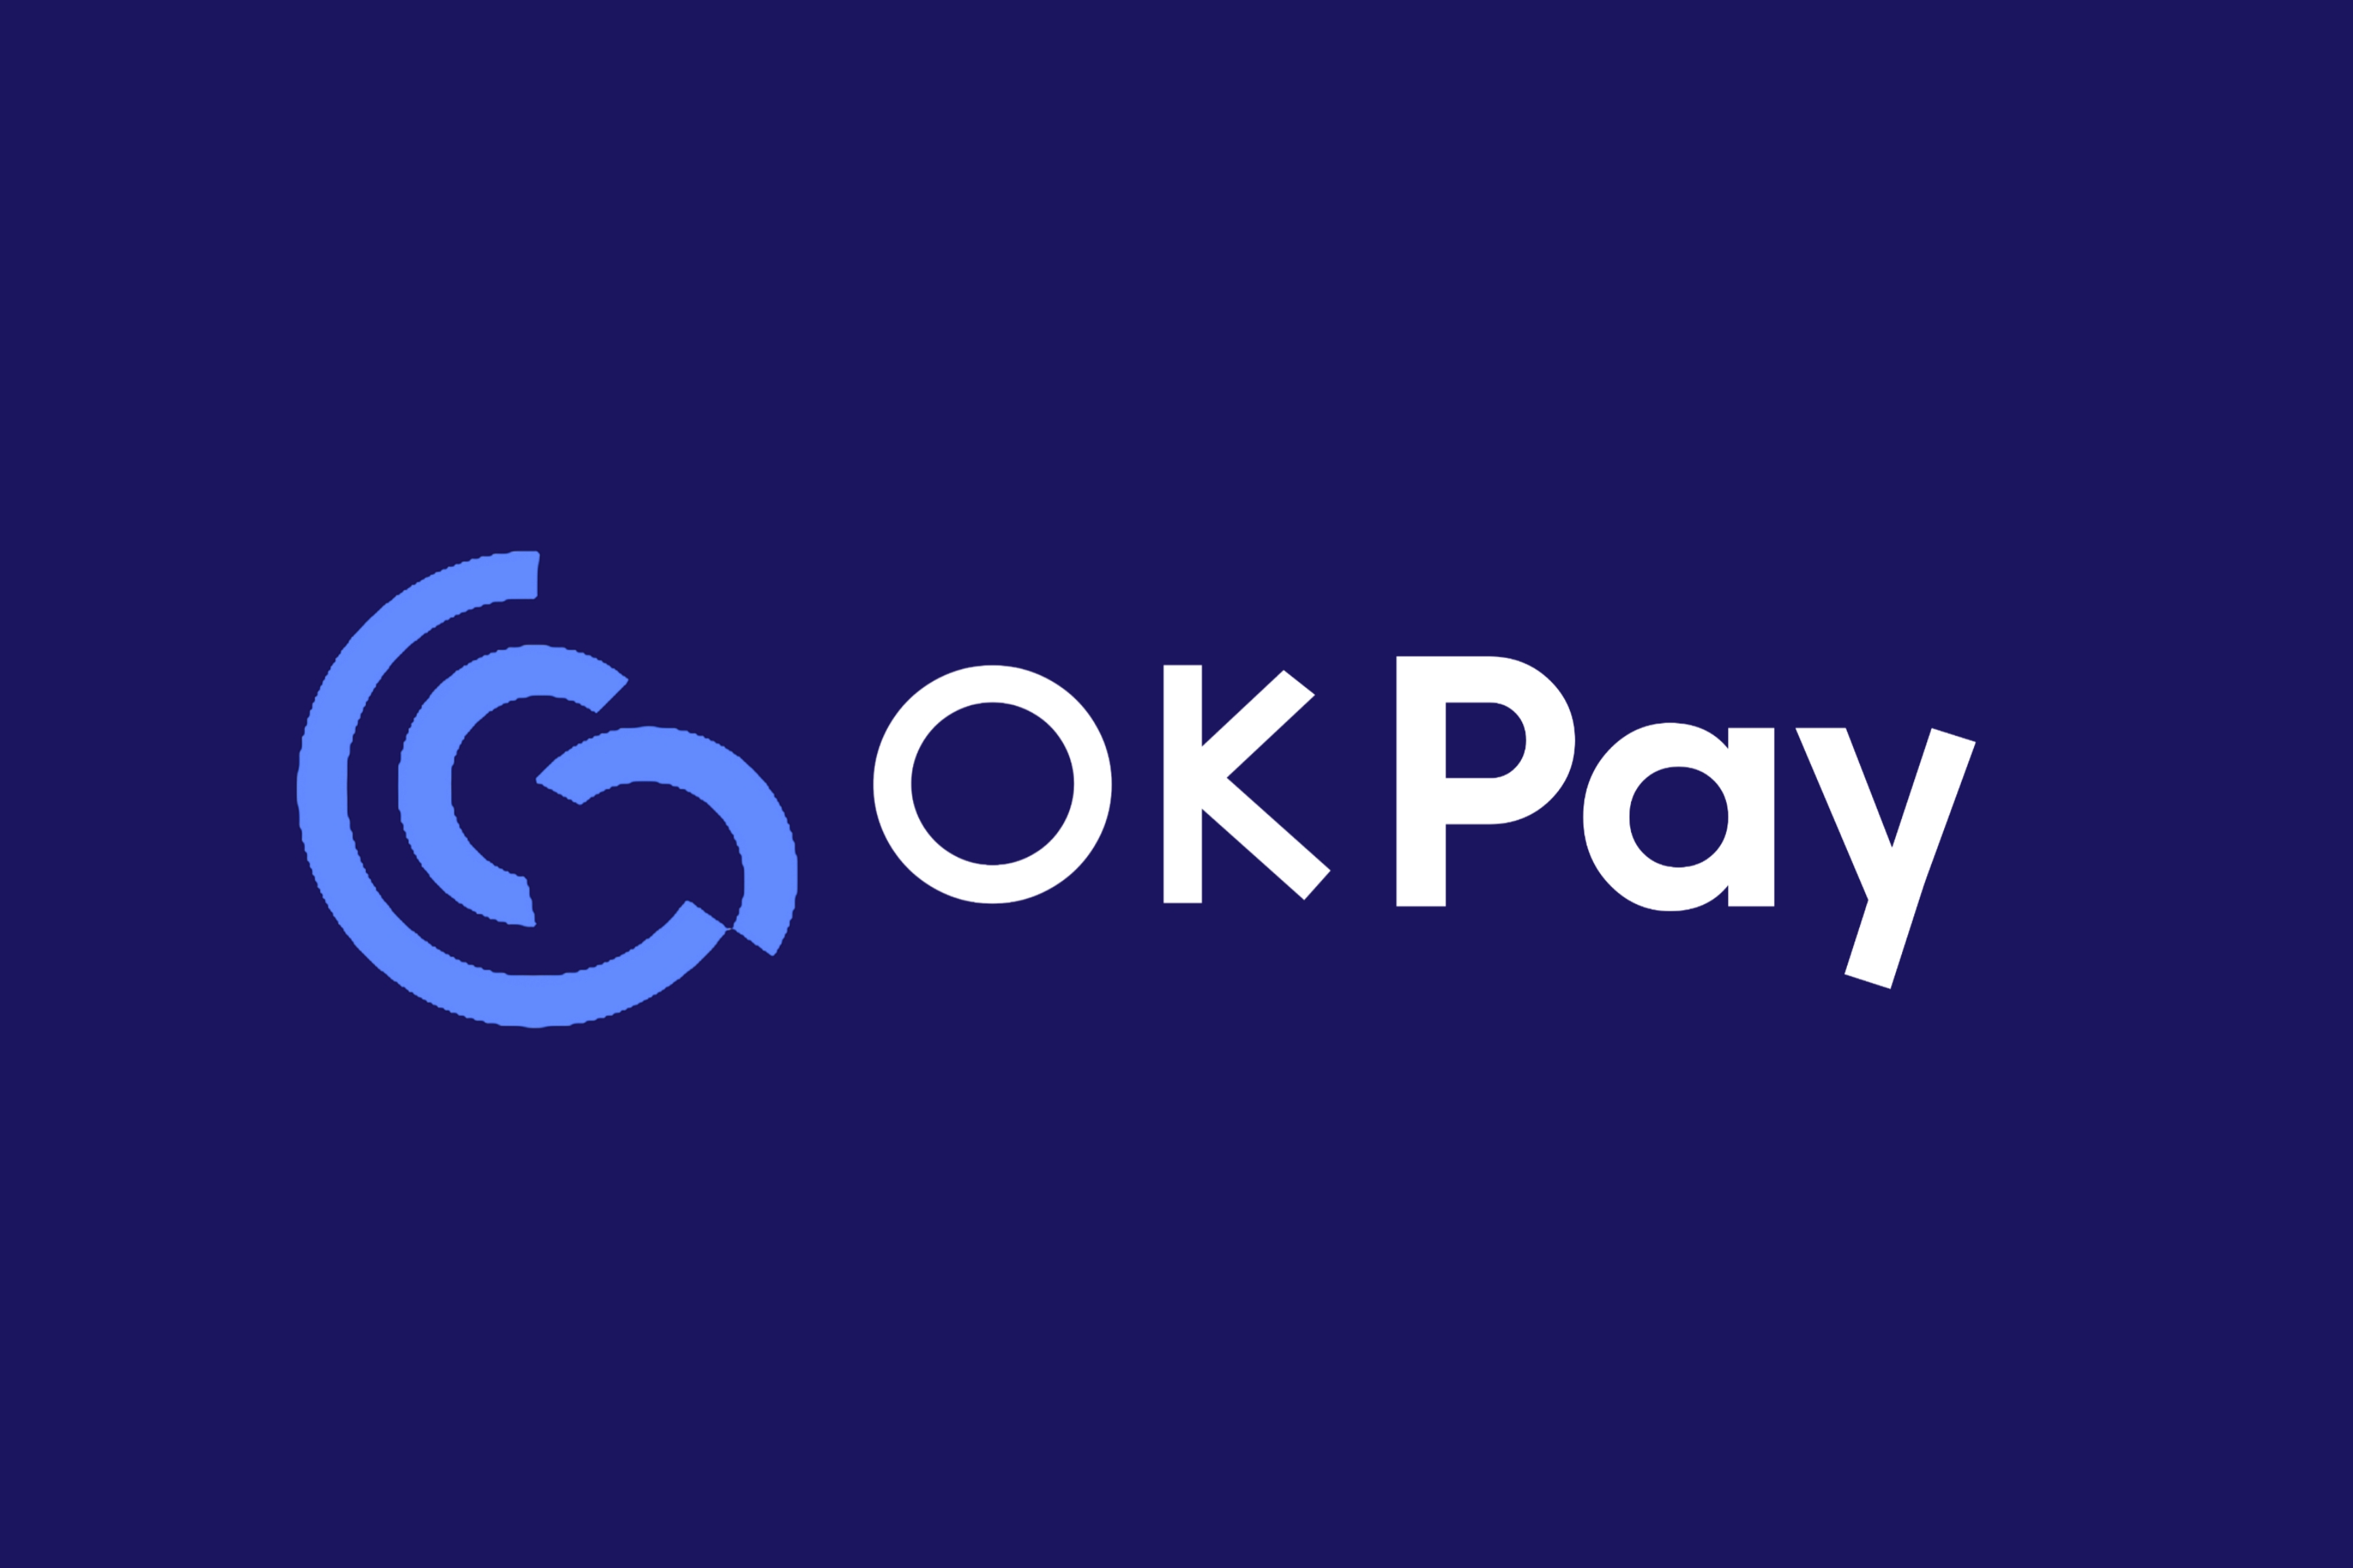 The new brand identify of Okay Pay